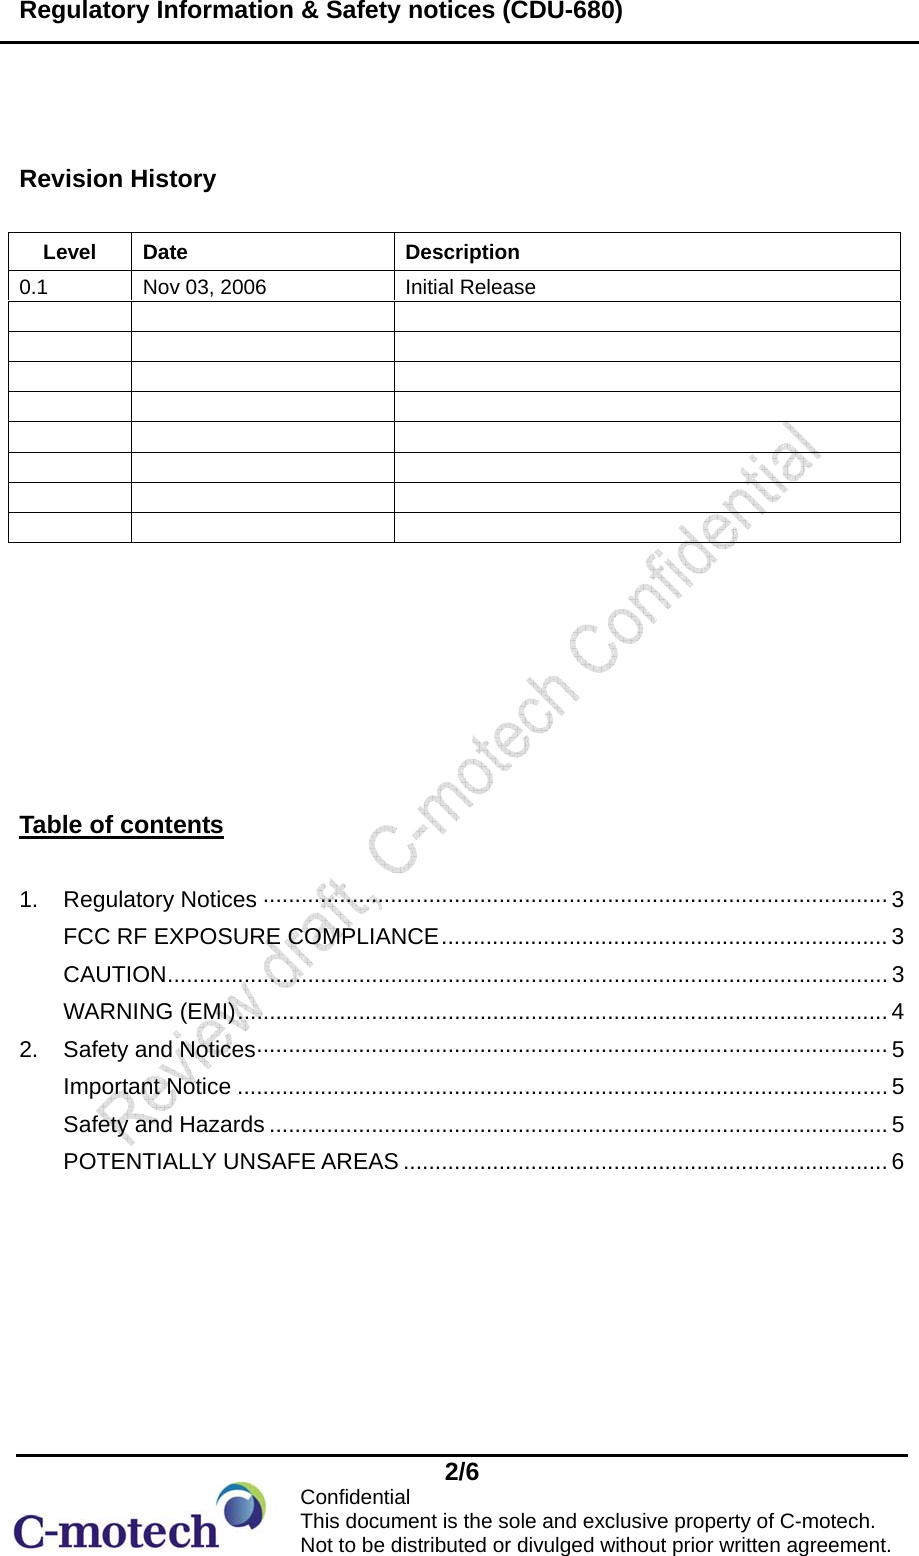 Regulatory Information &amp; Safety notices (CDU-680)  2/6            Confidential                      This document is the sole and exclusive property of C-motech.                    Not to be distributed or divulged without prior written agreement.  Revision History        Table of contents  1. Regulatory Notices ·································································································· 3 FCC RF EXPOSURE COMPLIANCE...................................................................... 3 CAUTION................................................................................................................. 3 WARNING (EMI)...................................................................................................... 4 2.  Safety and Notices··································································································· 5 Important Notice ...................................................................................................... 5 Safety and Hazards ................................................................................................. 5 POTENTIALLY UNSAFE AREAS ............................................................................ 6   Level Date  Description 0.1  Nov 03, 2006  Initial Release                                 